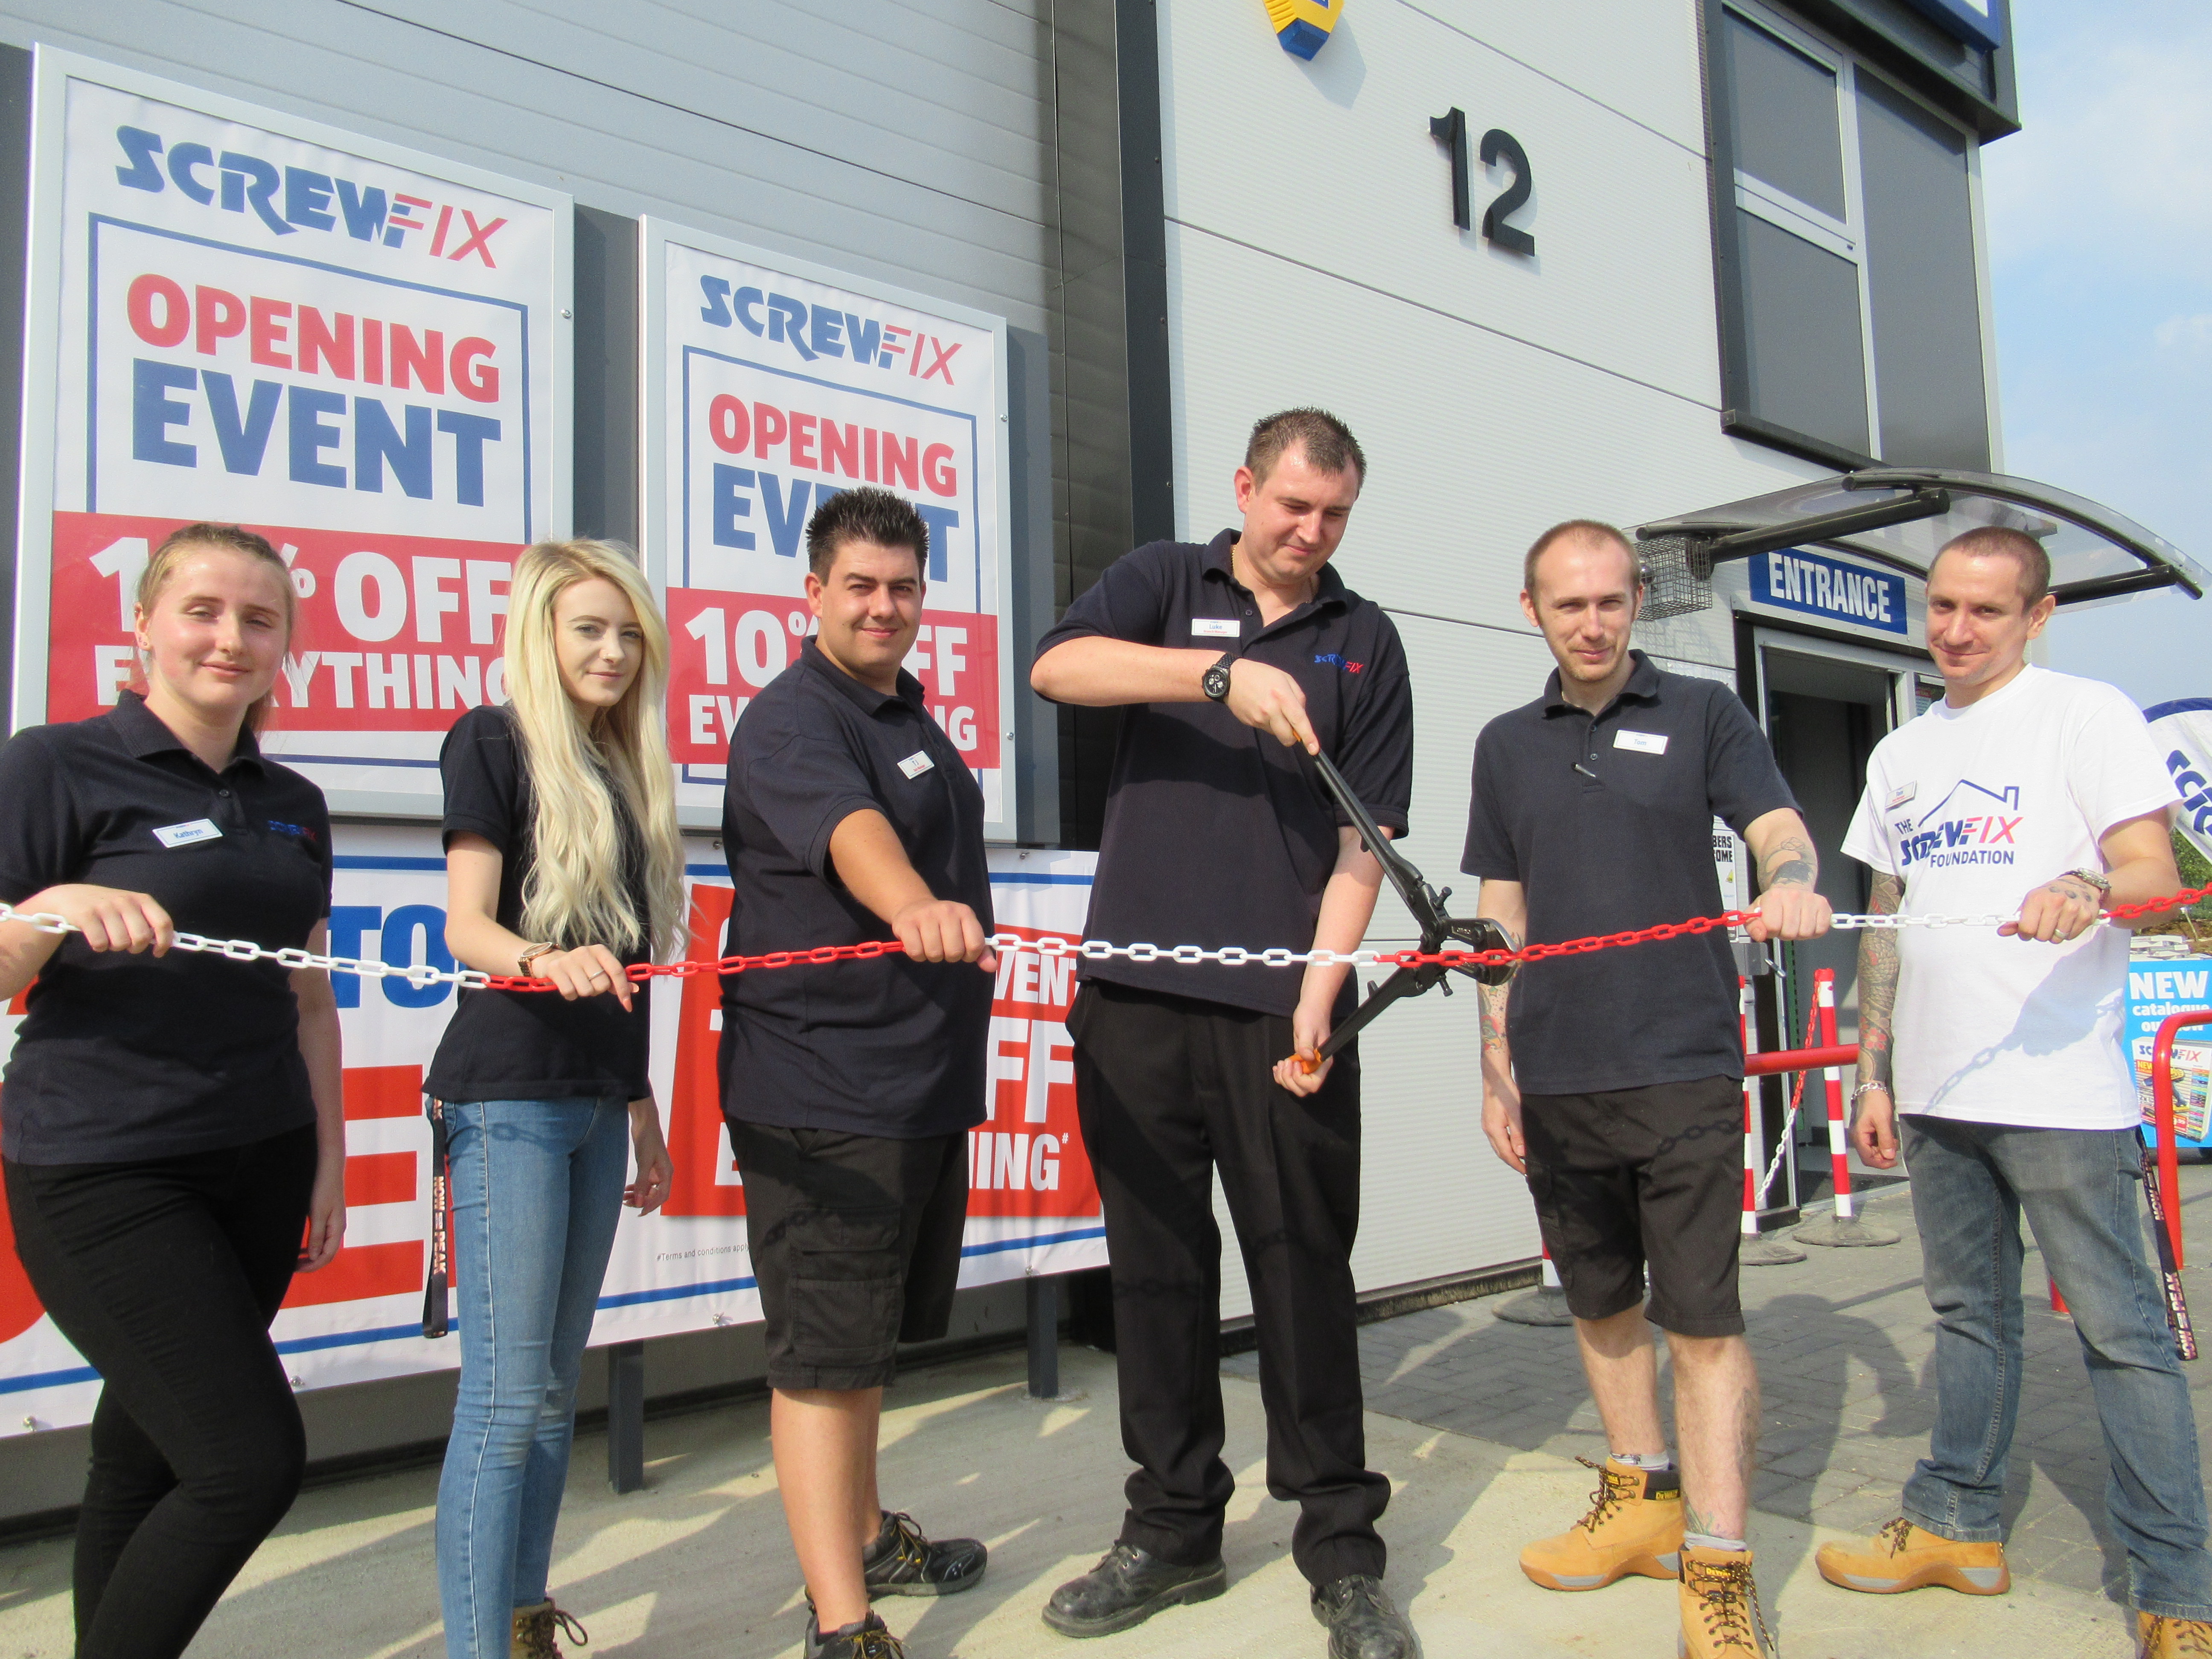 Yaxleys’ first Screwfix store is declared a runaway success